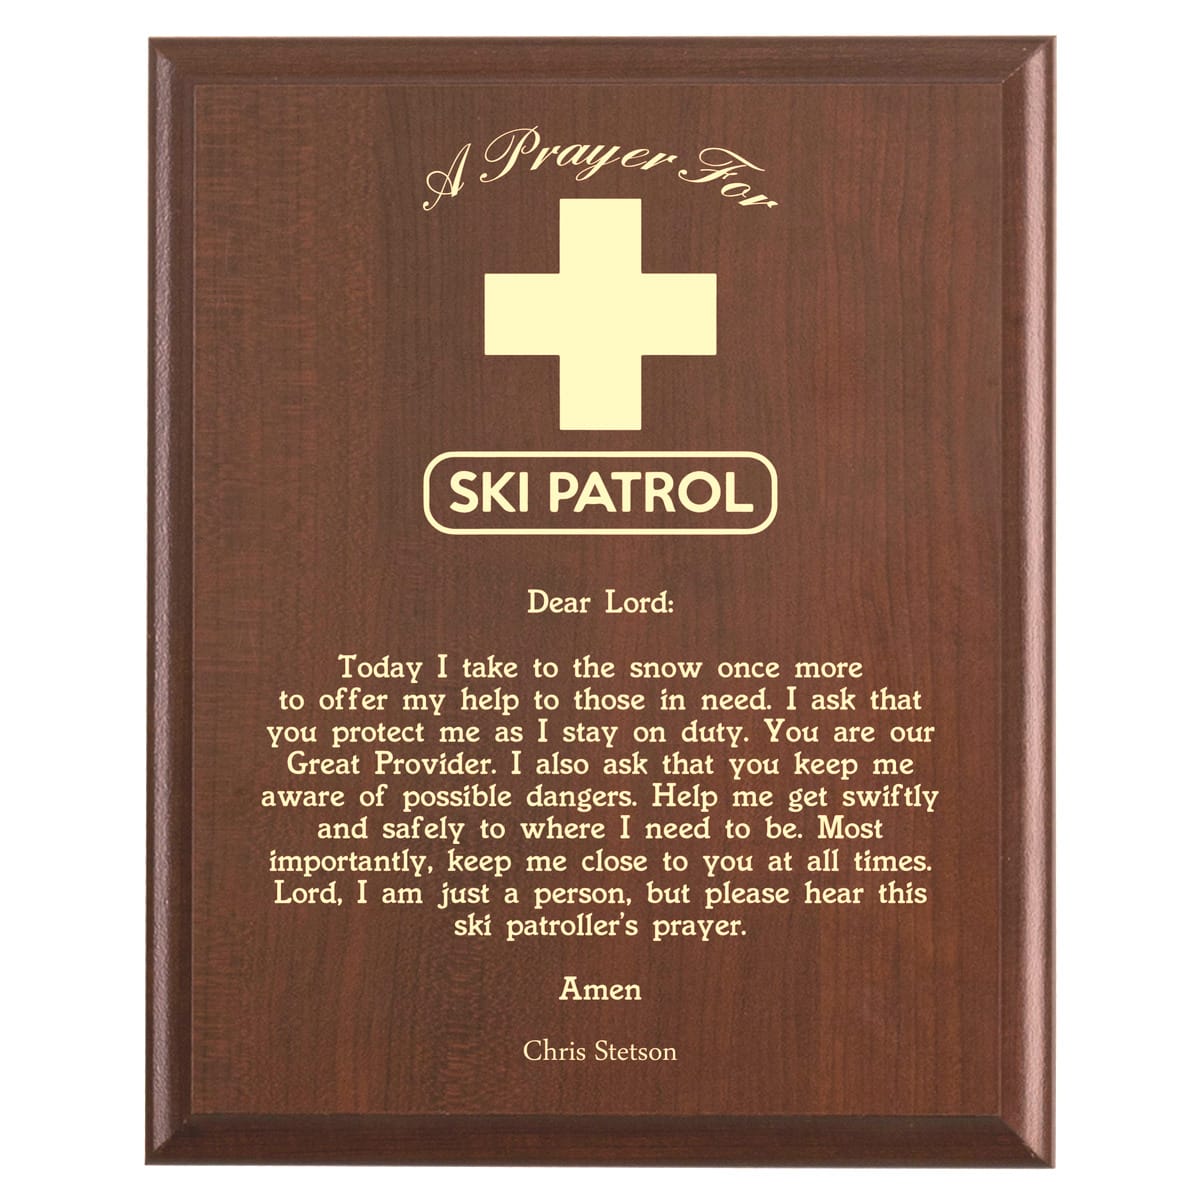 Plaque photo: Ski Patrol Prayer Plaque design with free personalization. Wood style finish with customized text.